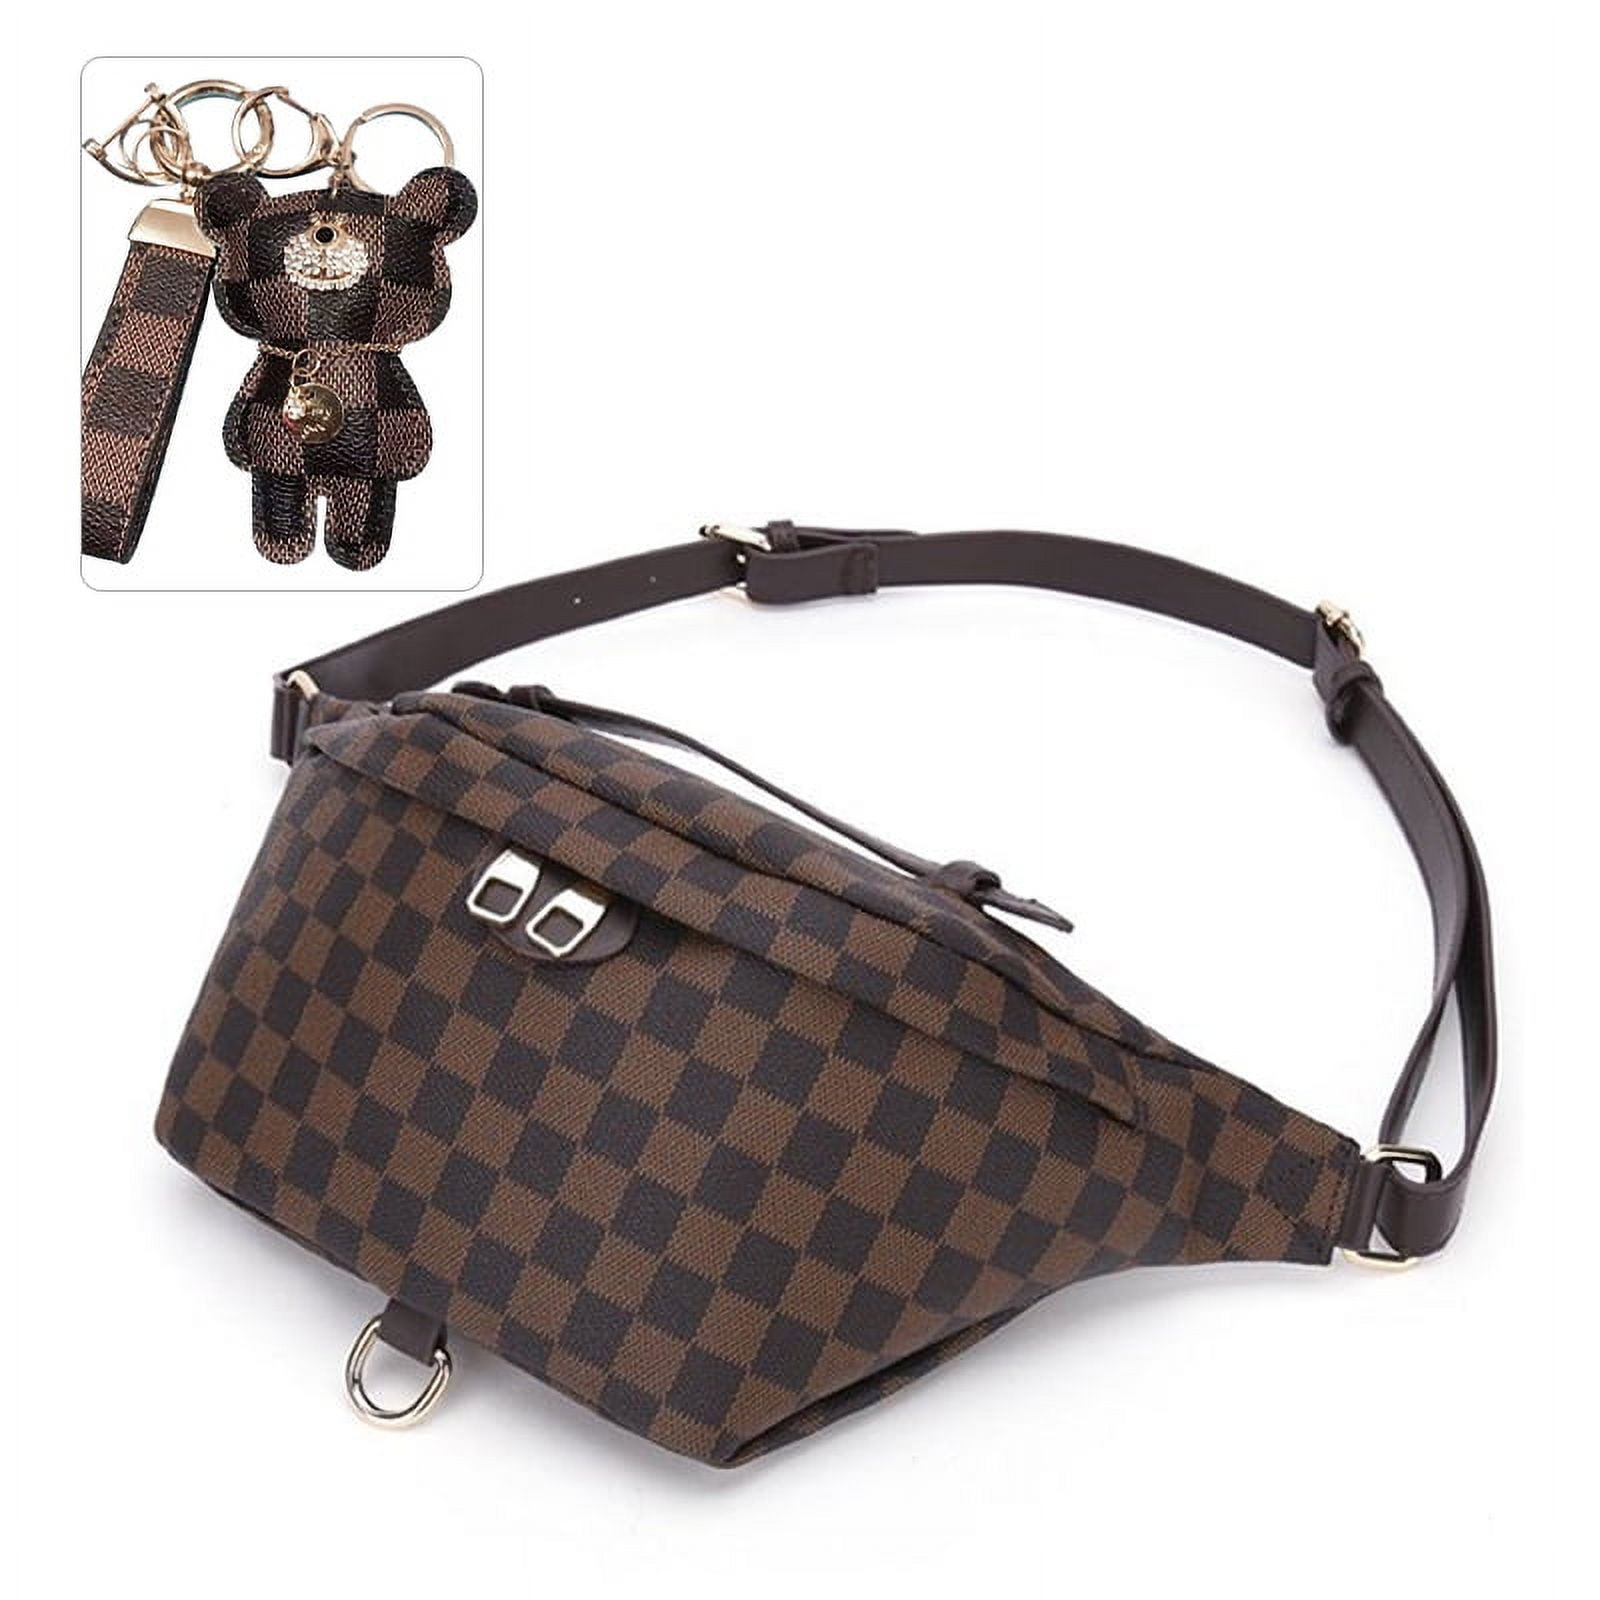 Zsoznqaky Triangle Brown Checkered Fanny Pack with Handle Womens Checkered Sling Purse Checkered Cross Body Waist Bag Crossbody Waist Pack Fashion